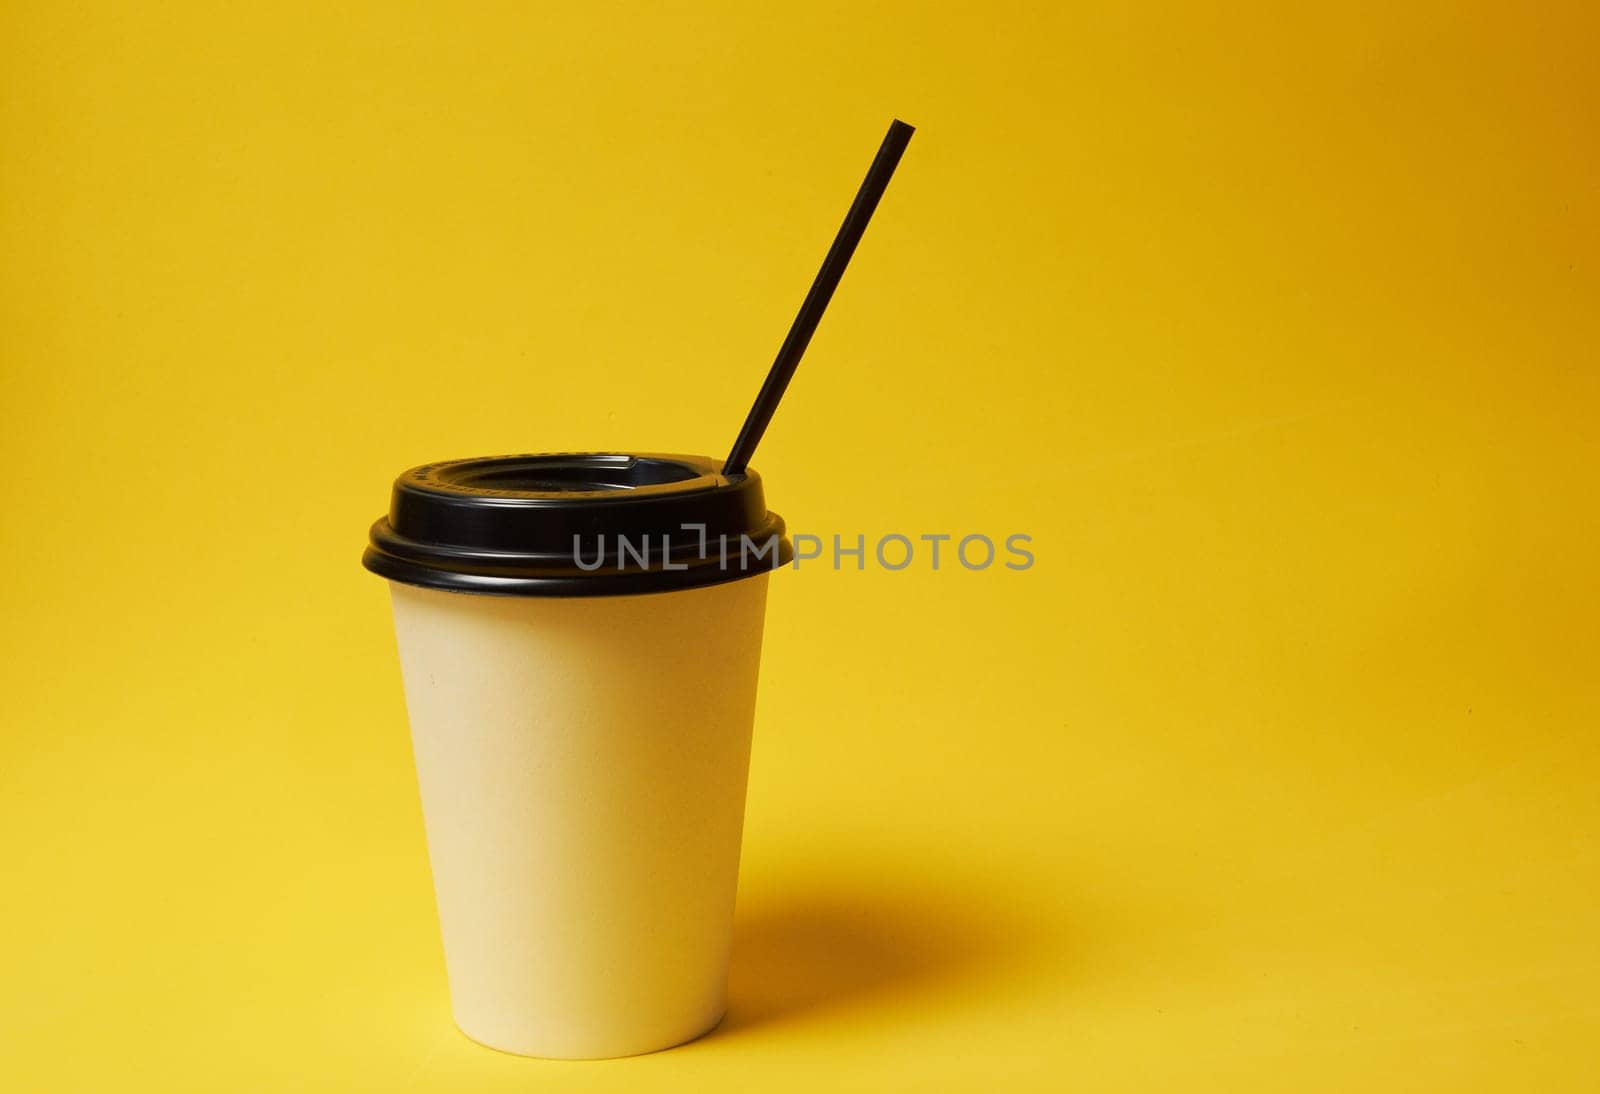 Paper Coffee Container with Black Lid on Yellow Background White Coffee Paper Cup with Black Lid on Yellow Background Takeaway Coffee